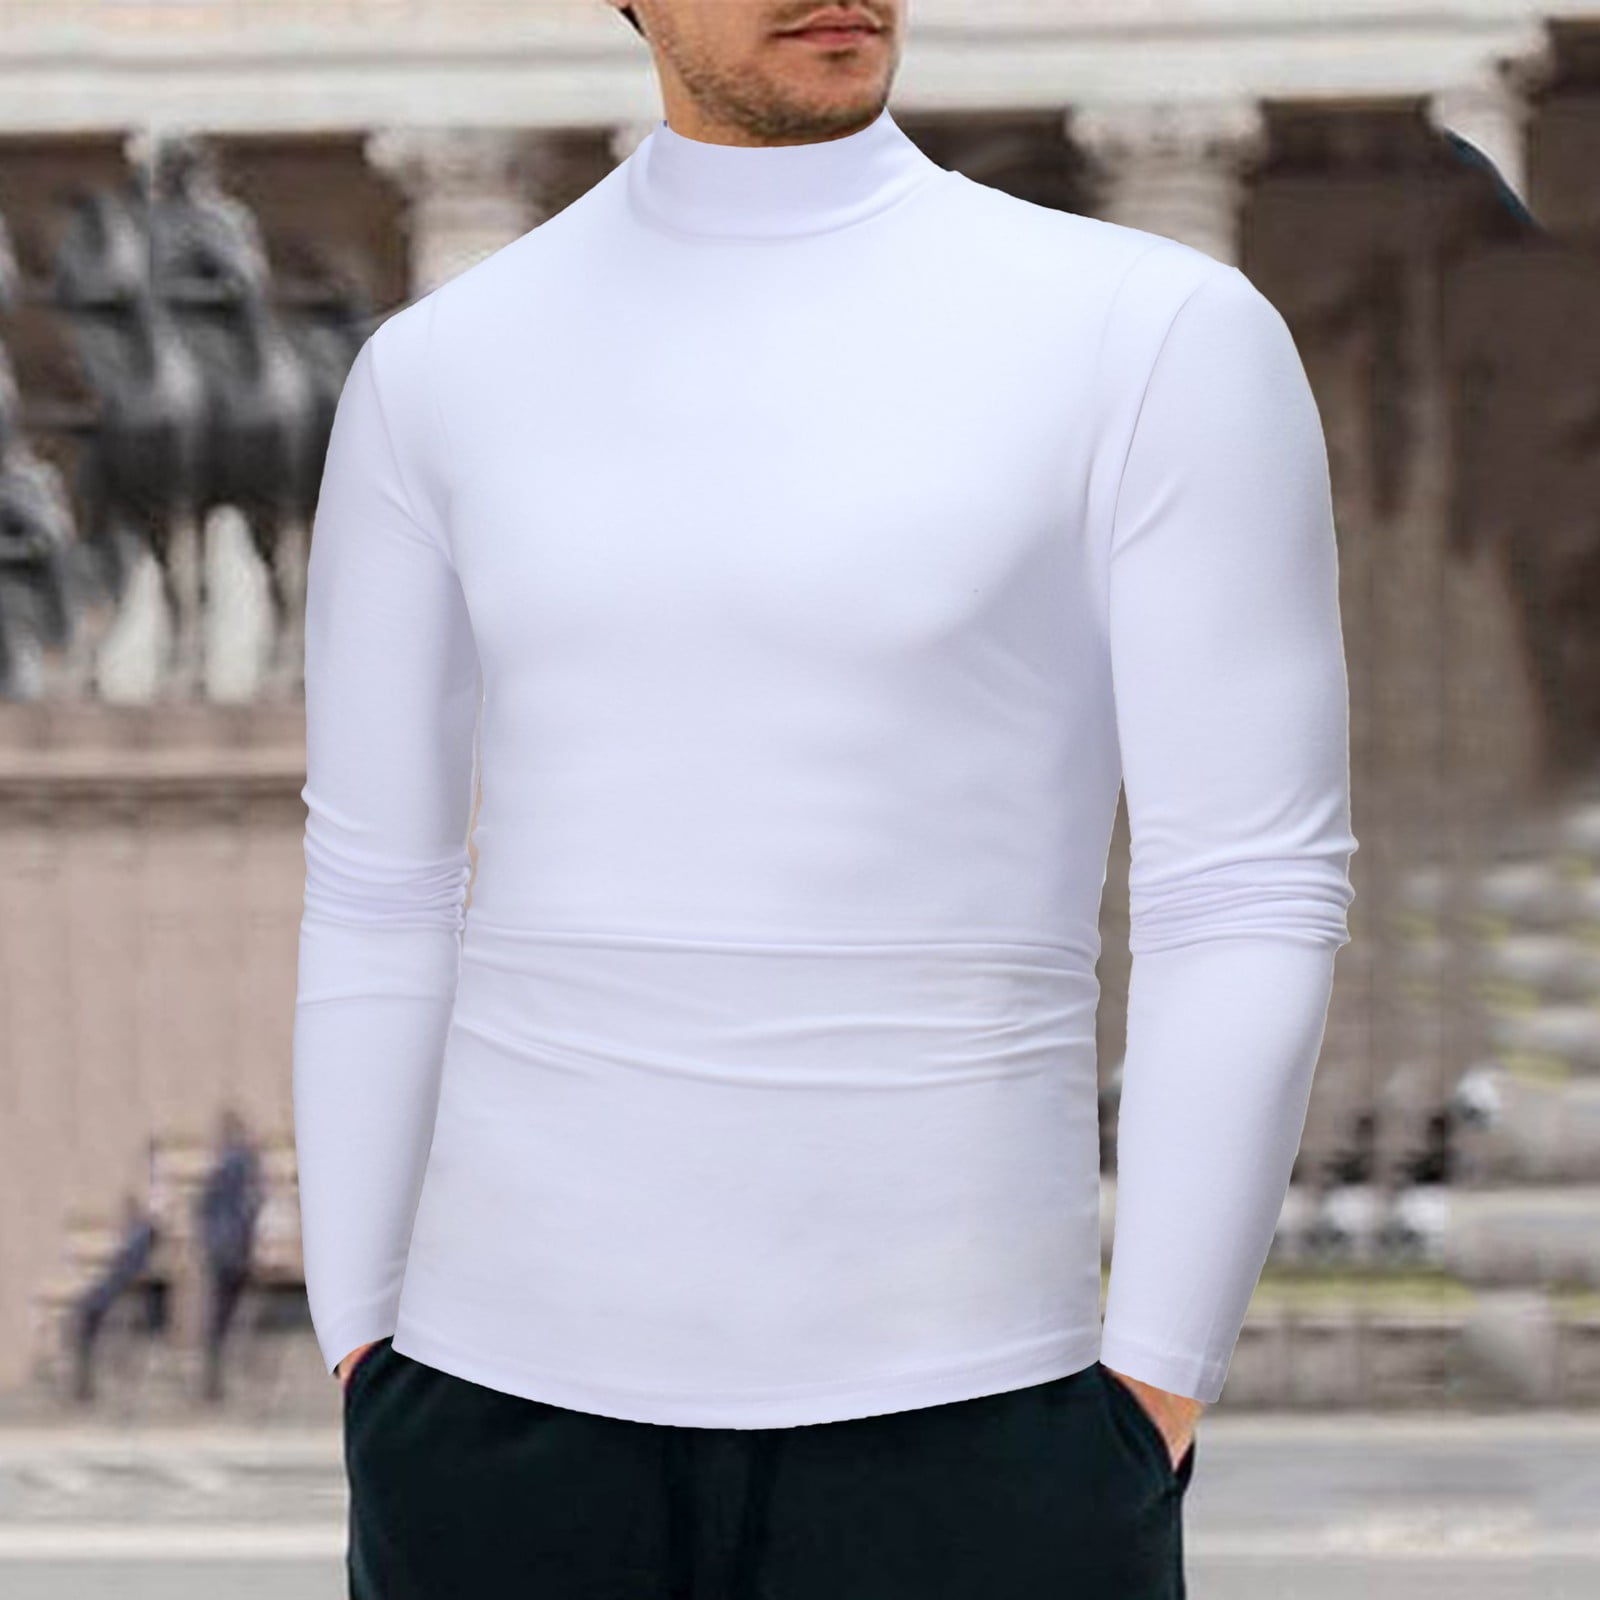 T-Shirts Male Winter Warm Low Collar Fashion Thermal Underwear Men Basic  Plain T Shirt Blouse Pullover Long Sleeve Top 